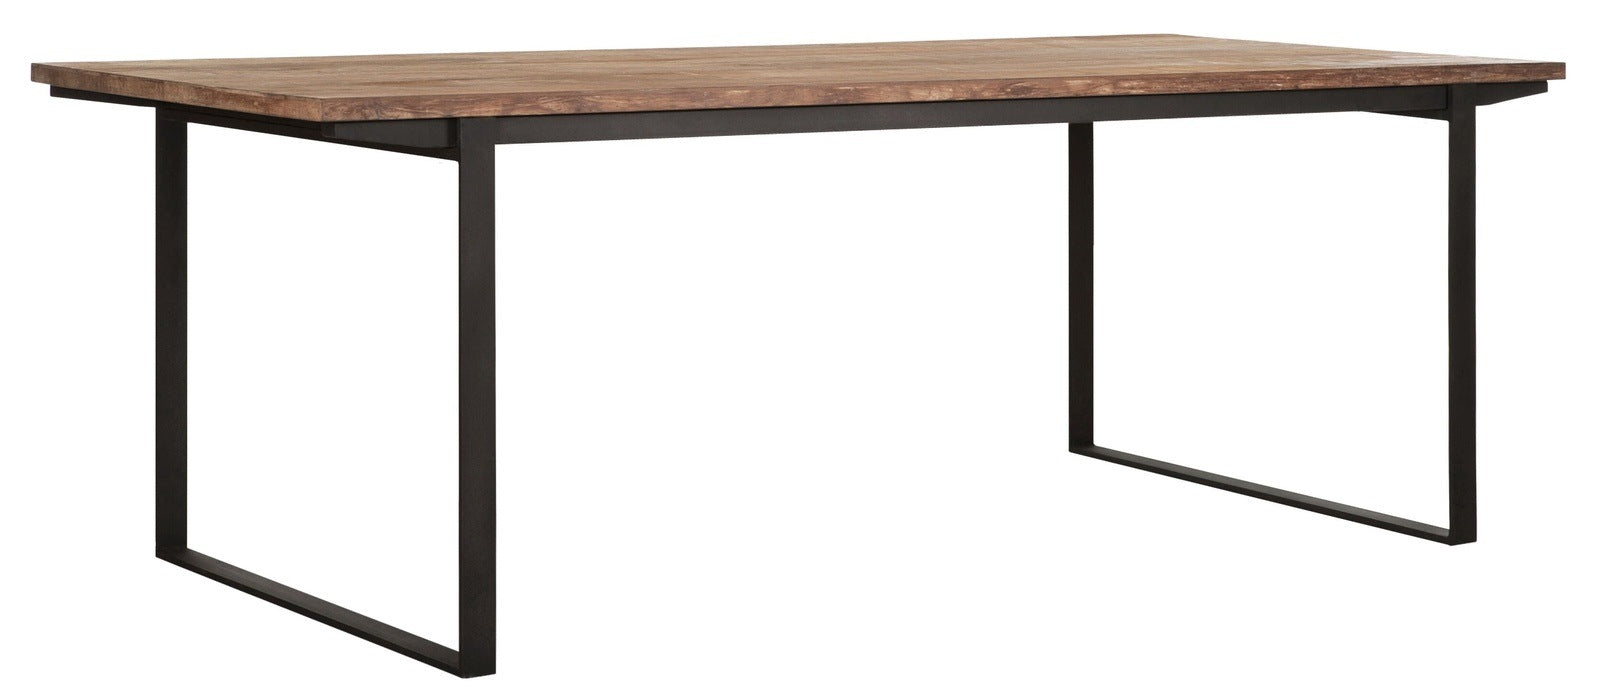 Dtp Home Odeon Rectangular Dining Table In Recycled Teakwood Finish Medium